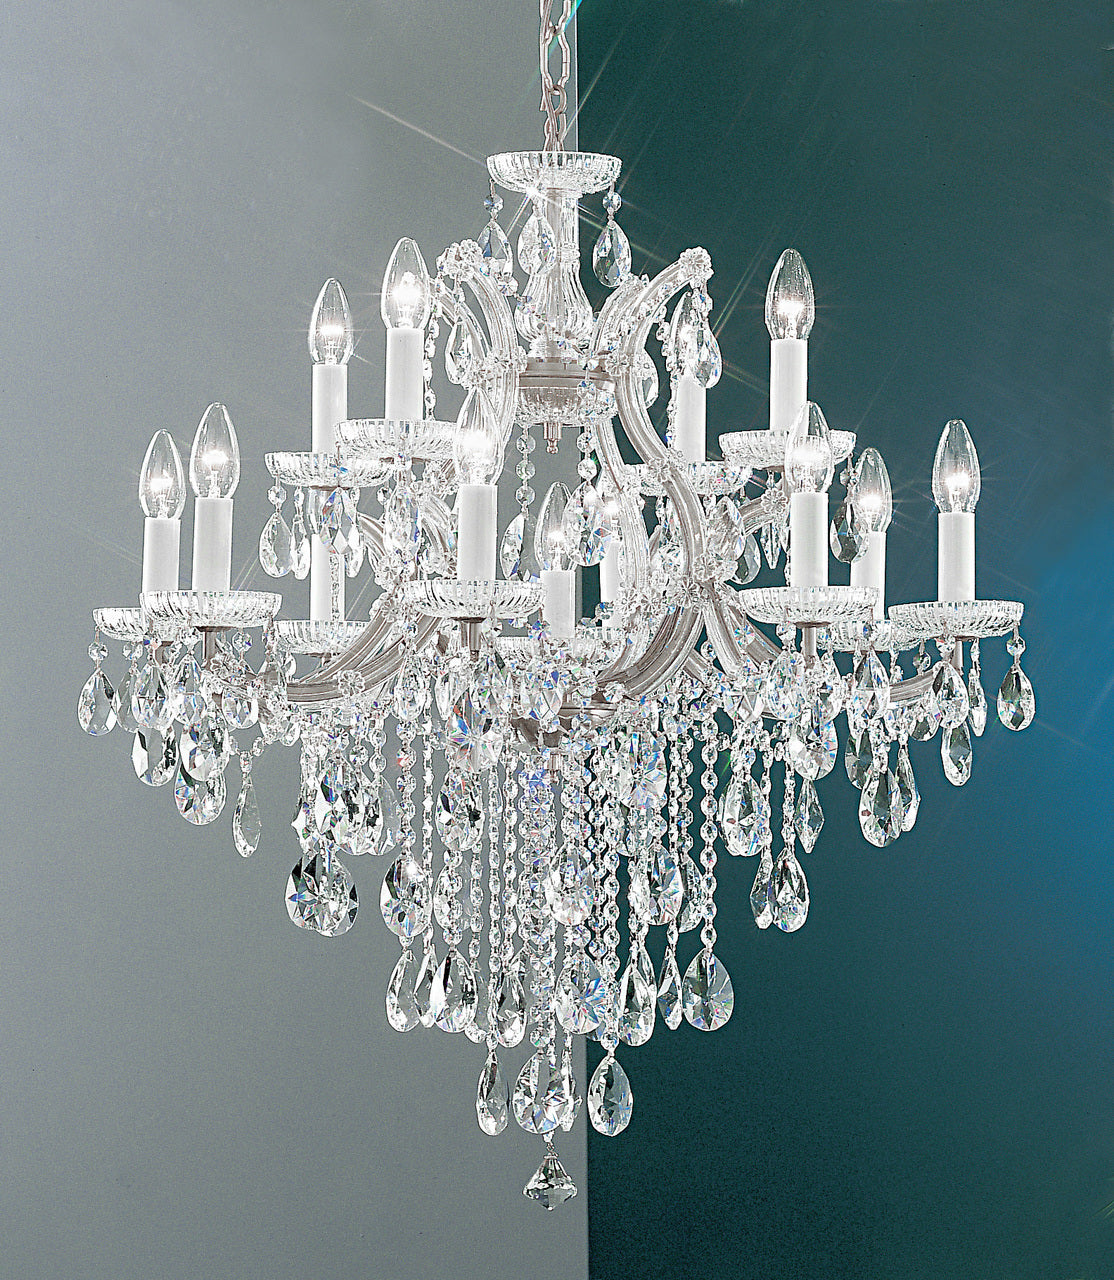 Classic Lighting 8124 CH SC Maria Theresa Traditional Crystal Chandelier in Chrome (Imported from Italy)